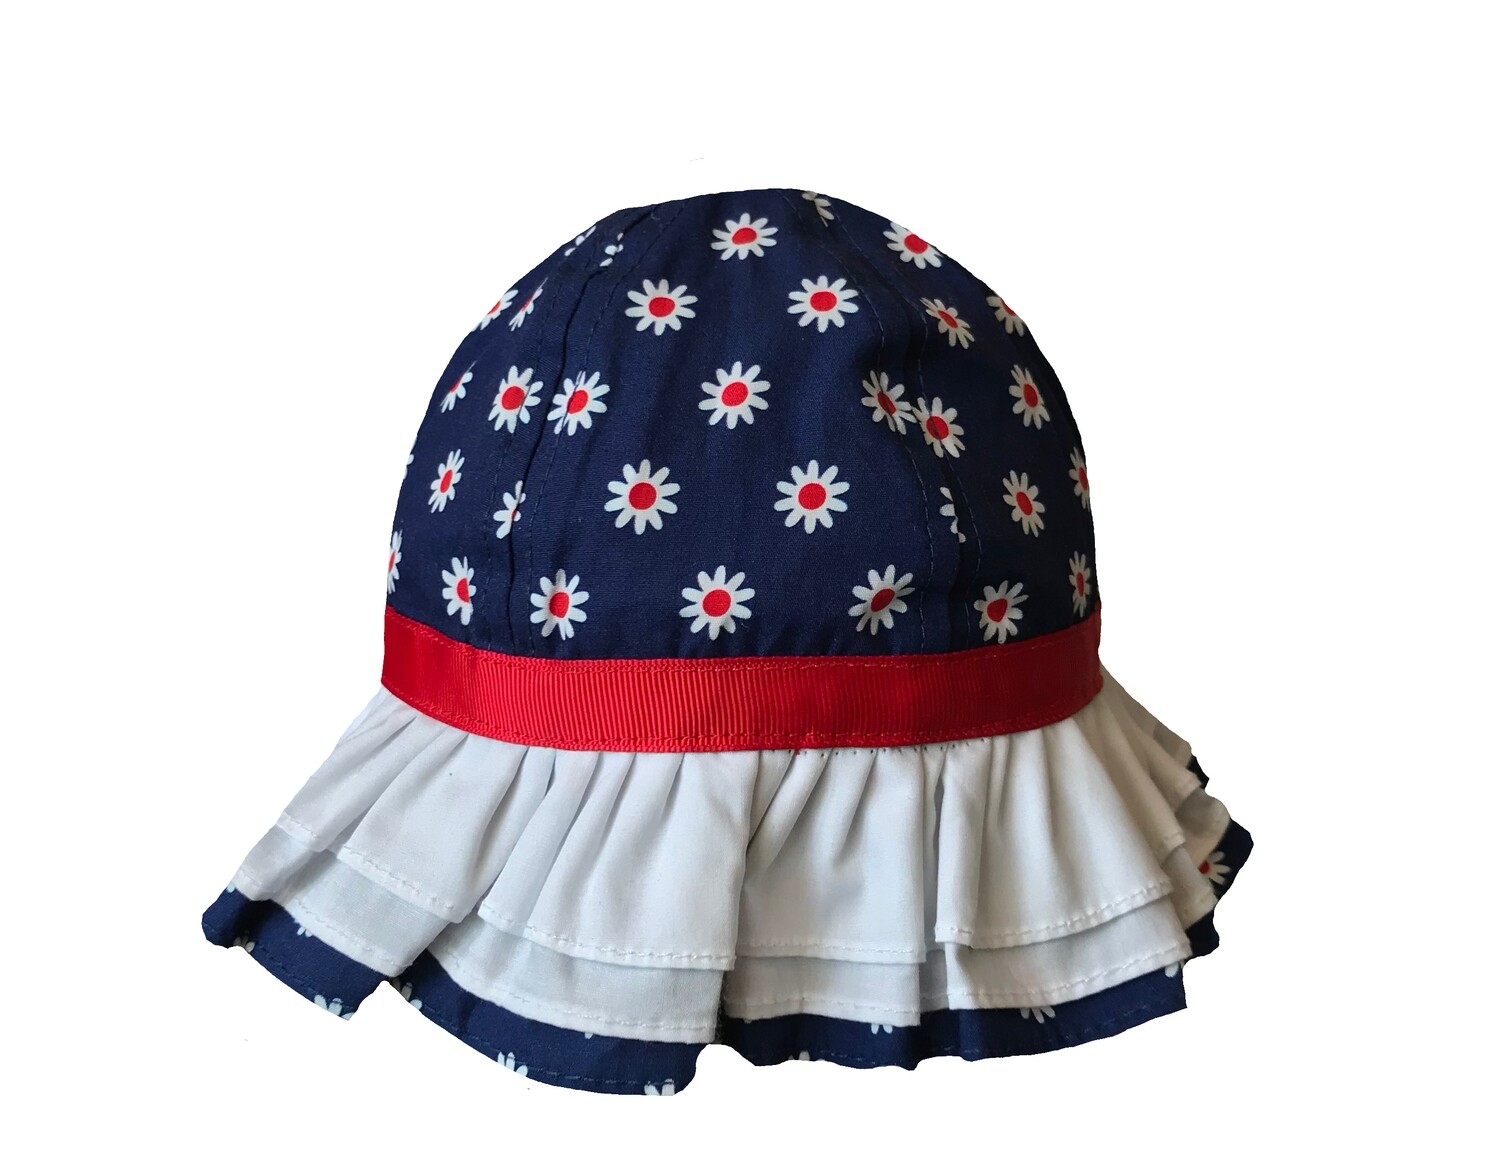 Wee Ones Red, White, & Blue Flowers Sunhat (Tie Strap)